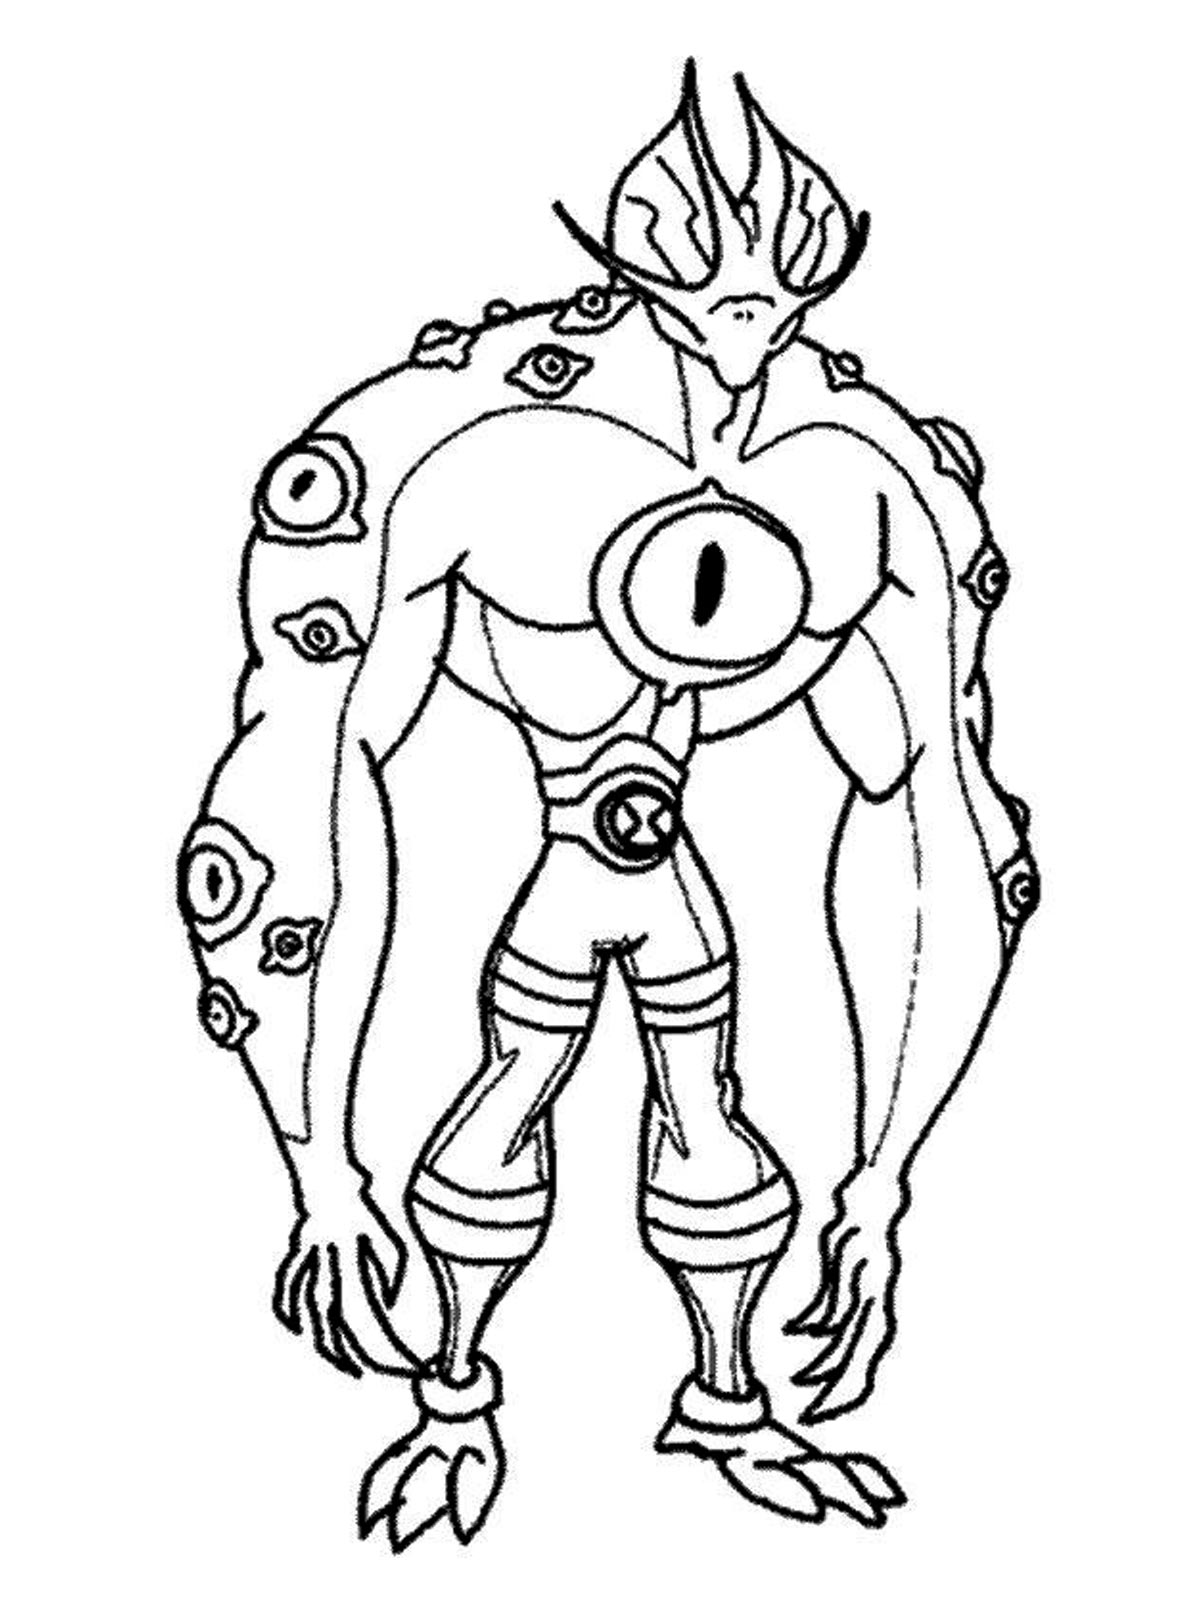 Ben 10 Printable Coloring Book - High Quality Coloring Pages